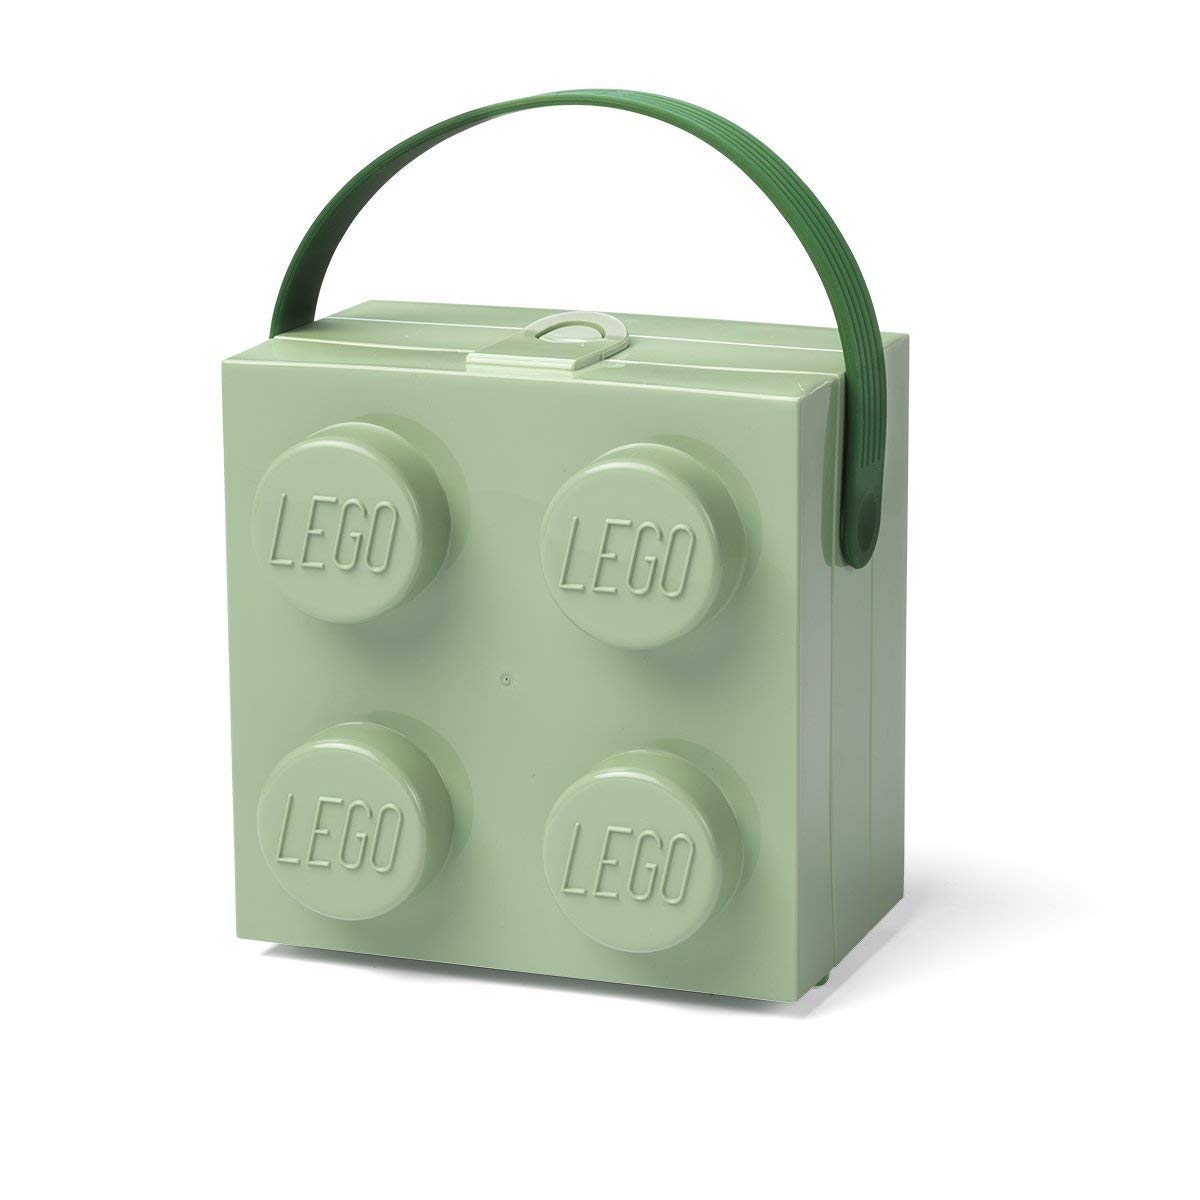 Lego Lunch Box With Handle Sand Portable Storage Box Green